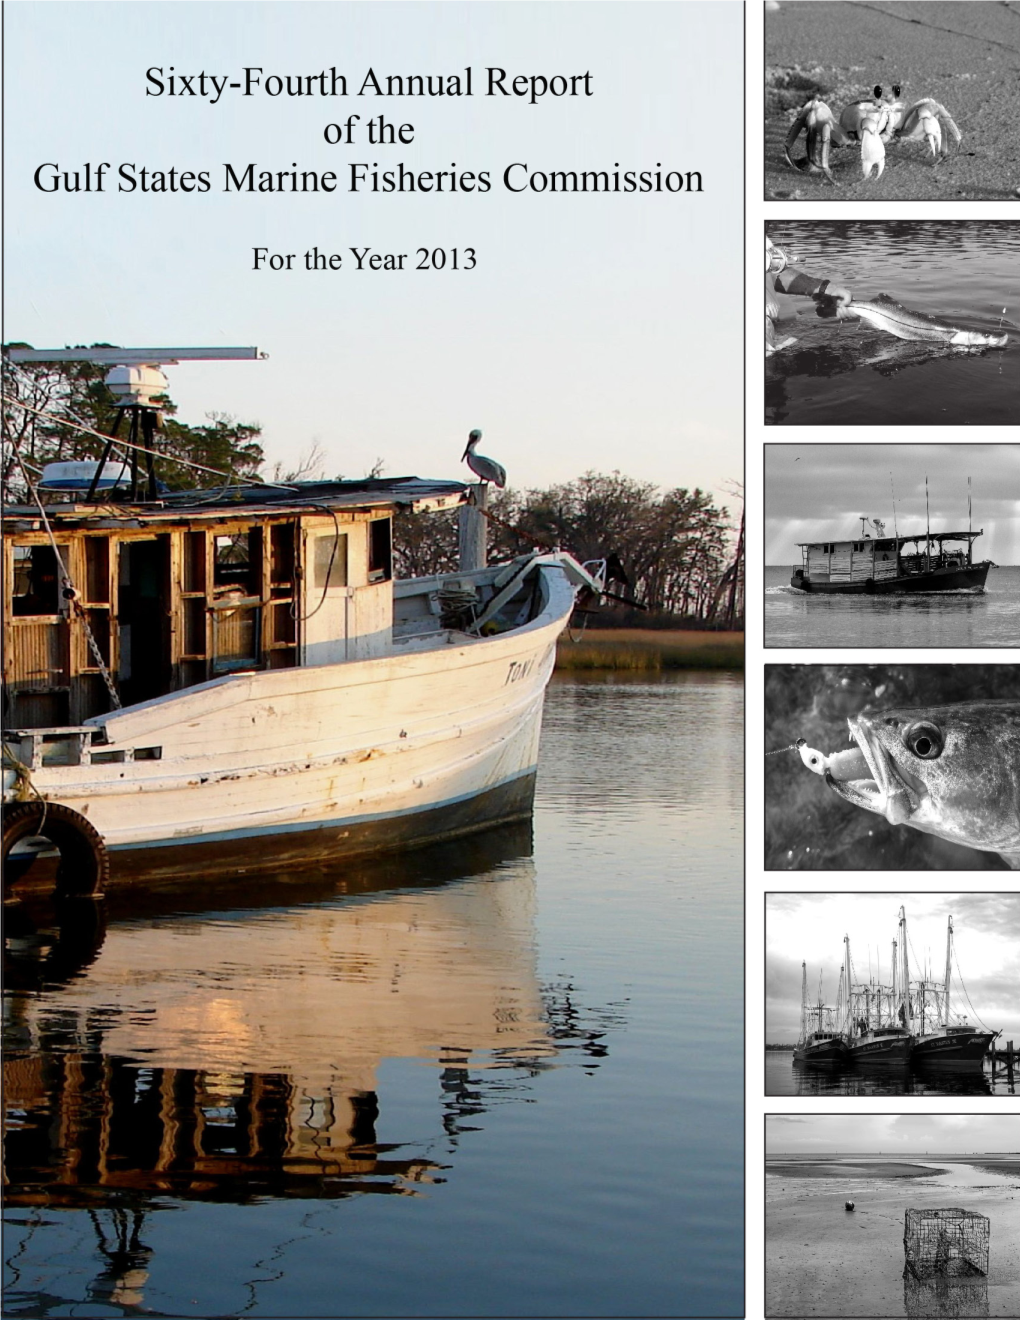 Sixty-Fourth Annual Report (2013) of the GULF STATES MARINE